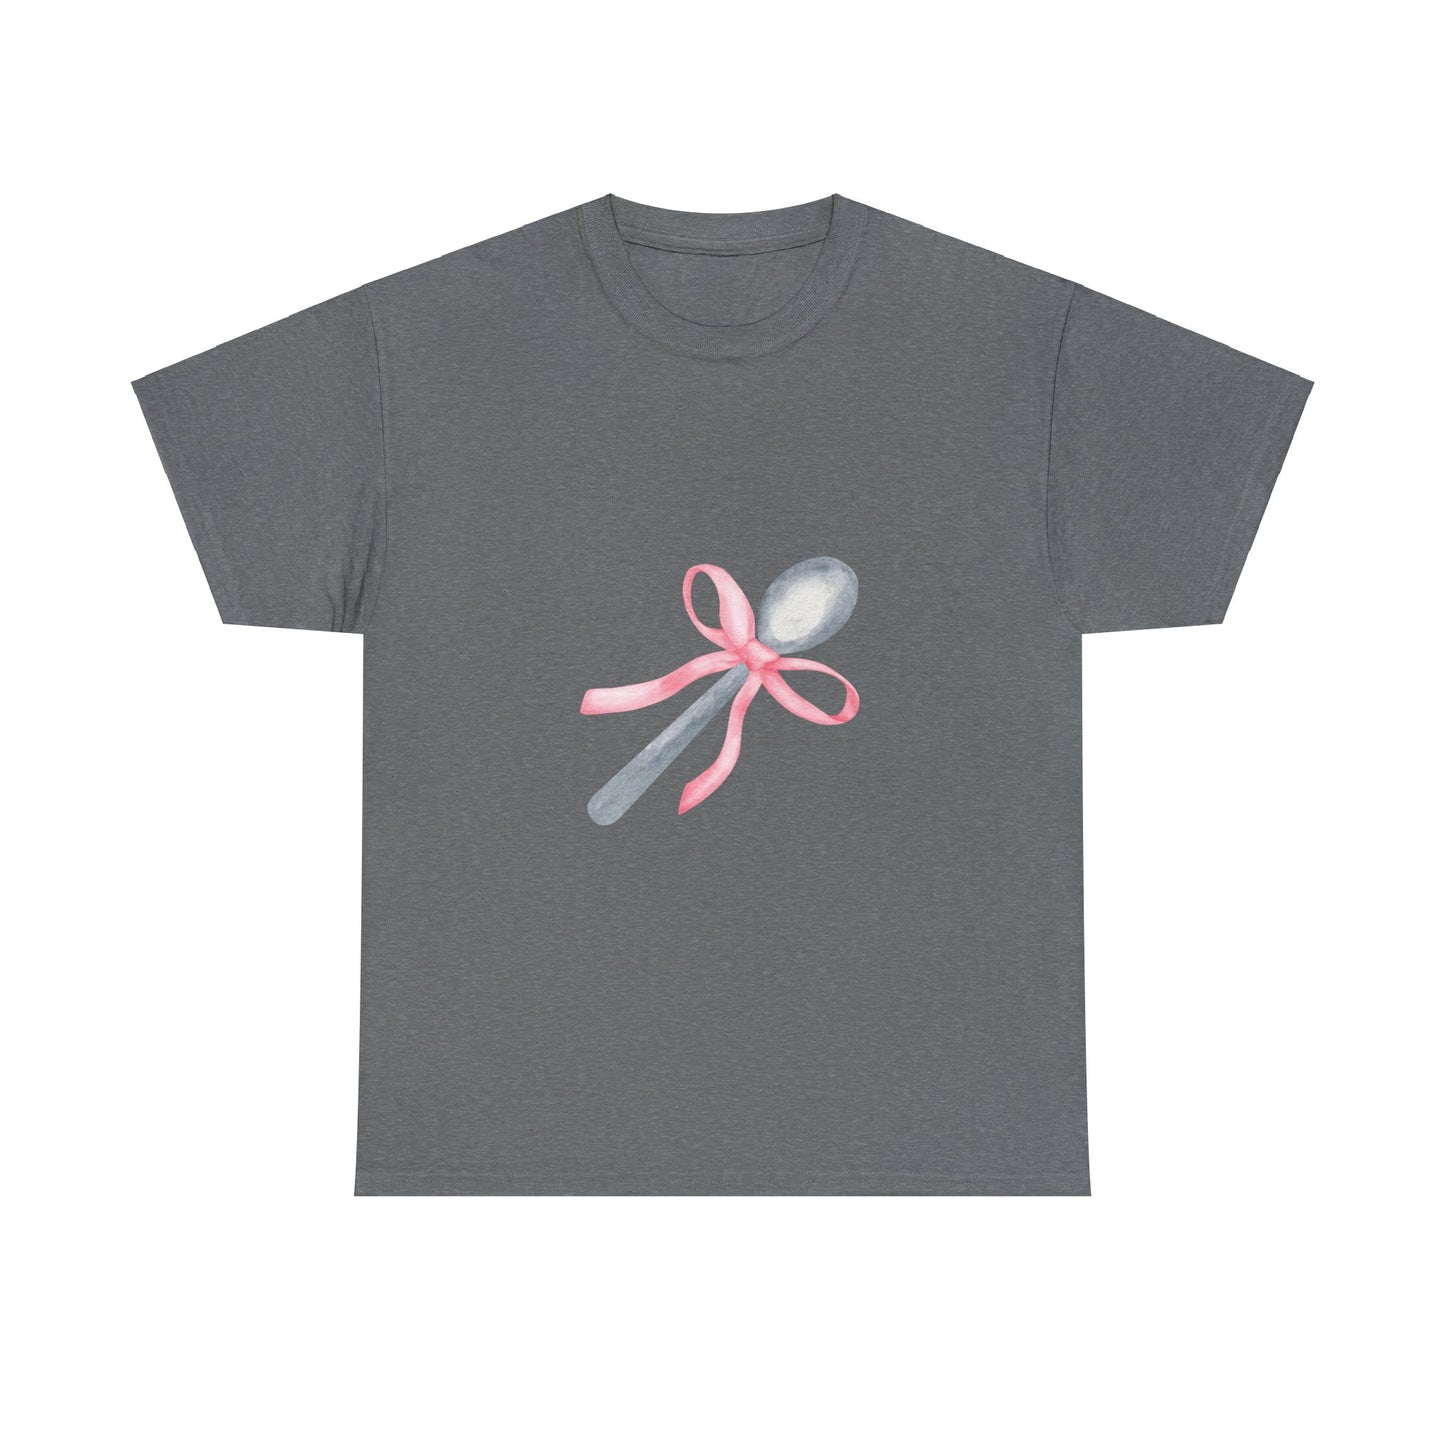 Coquette Spoon With Pink Bow Shirt